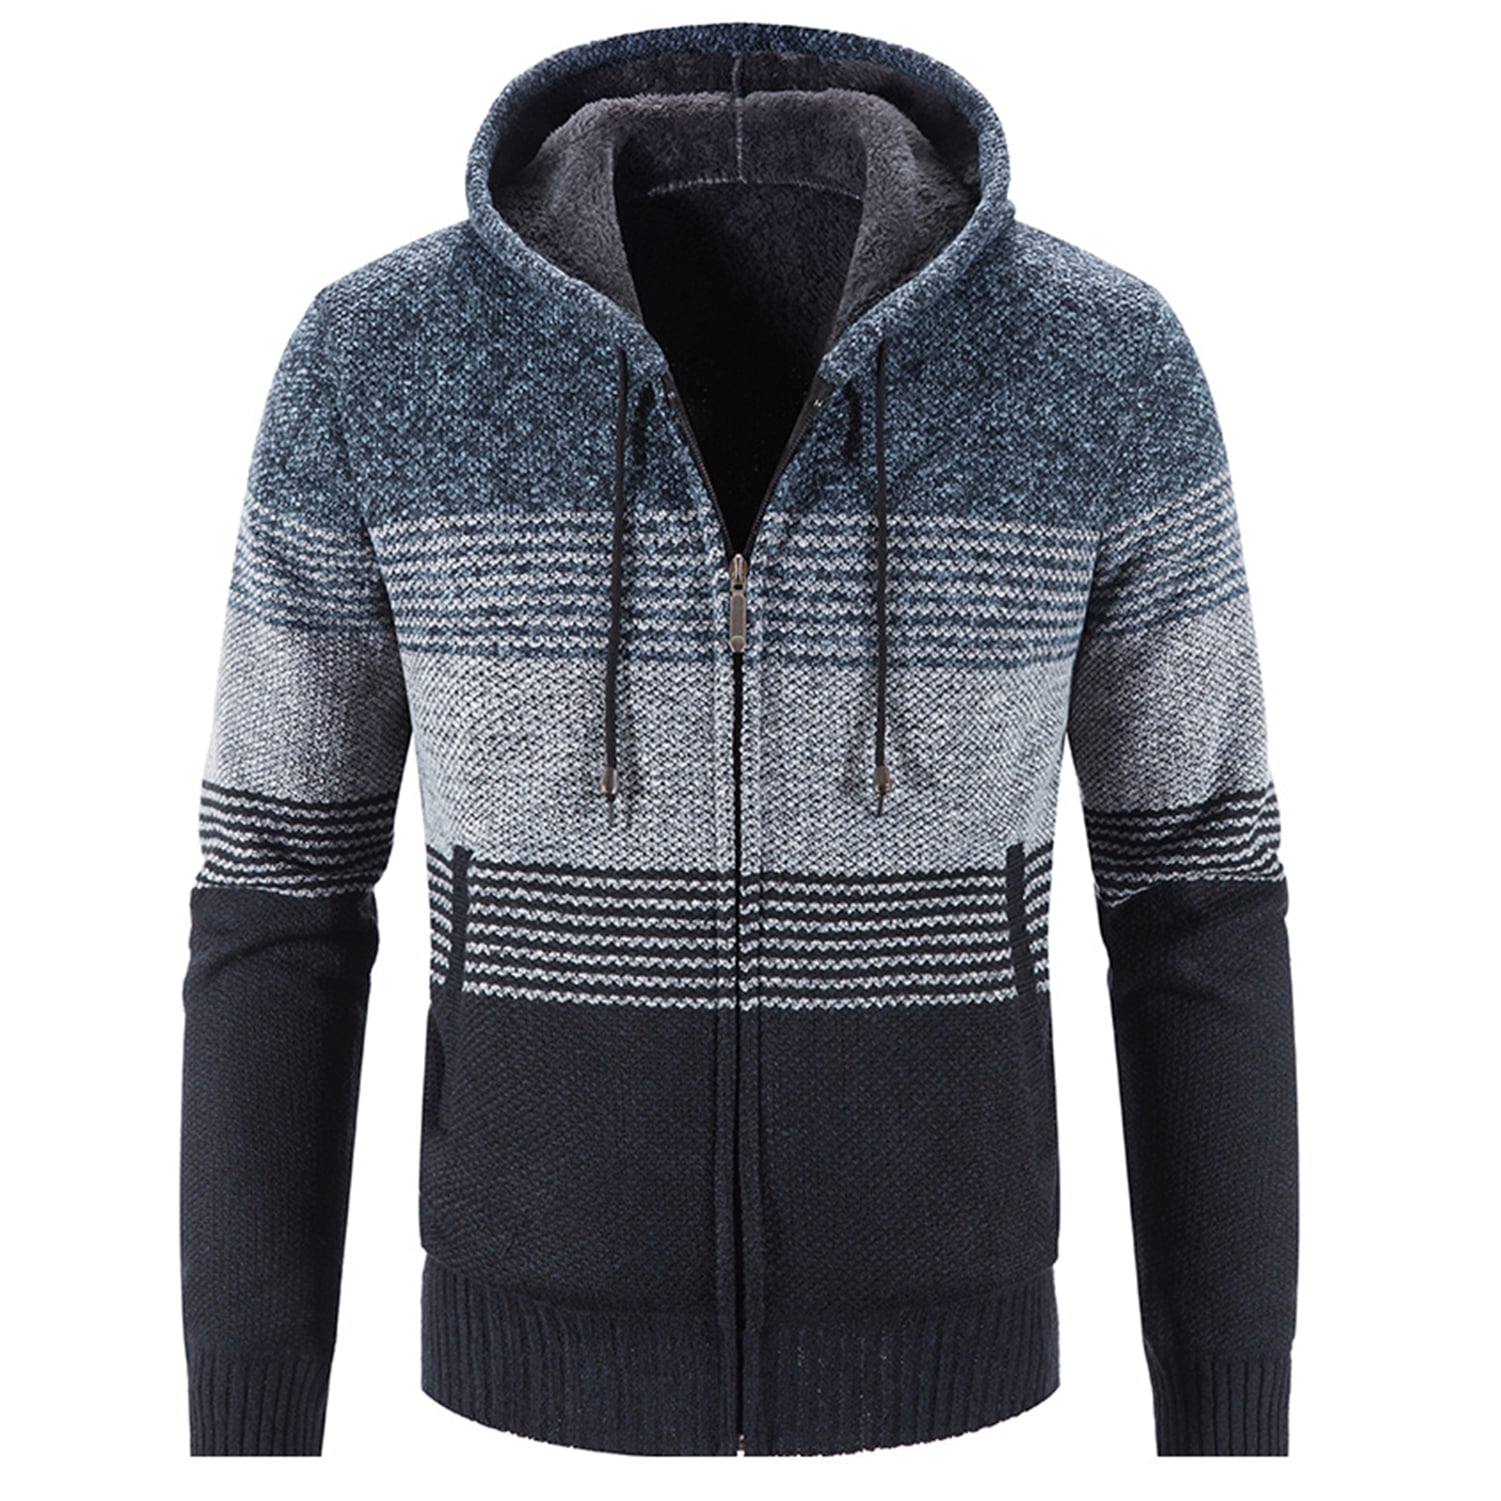 Lu's Chic Men's Hooded Sweatshirt Bold Striped Casual Long Sleeve Fuzzy  Fleece Lined Jacket Thick Knitted Knit Slim Fit Cardigan Sweater Zip Up  Hoodie